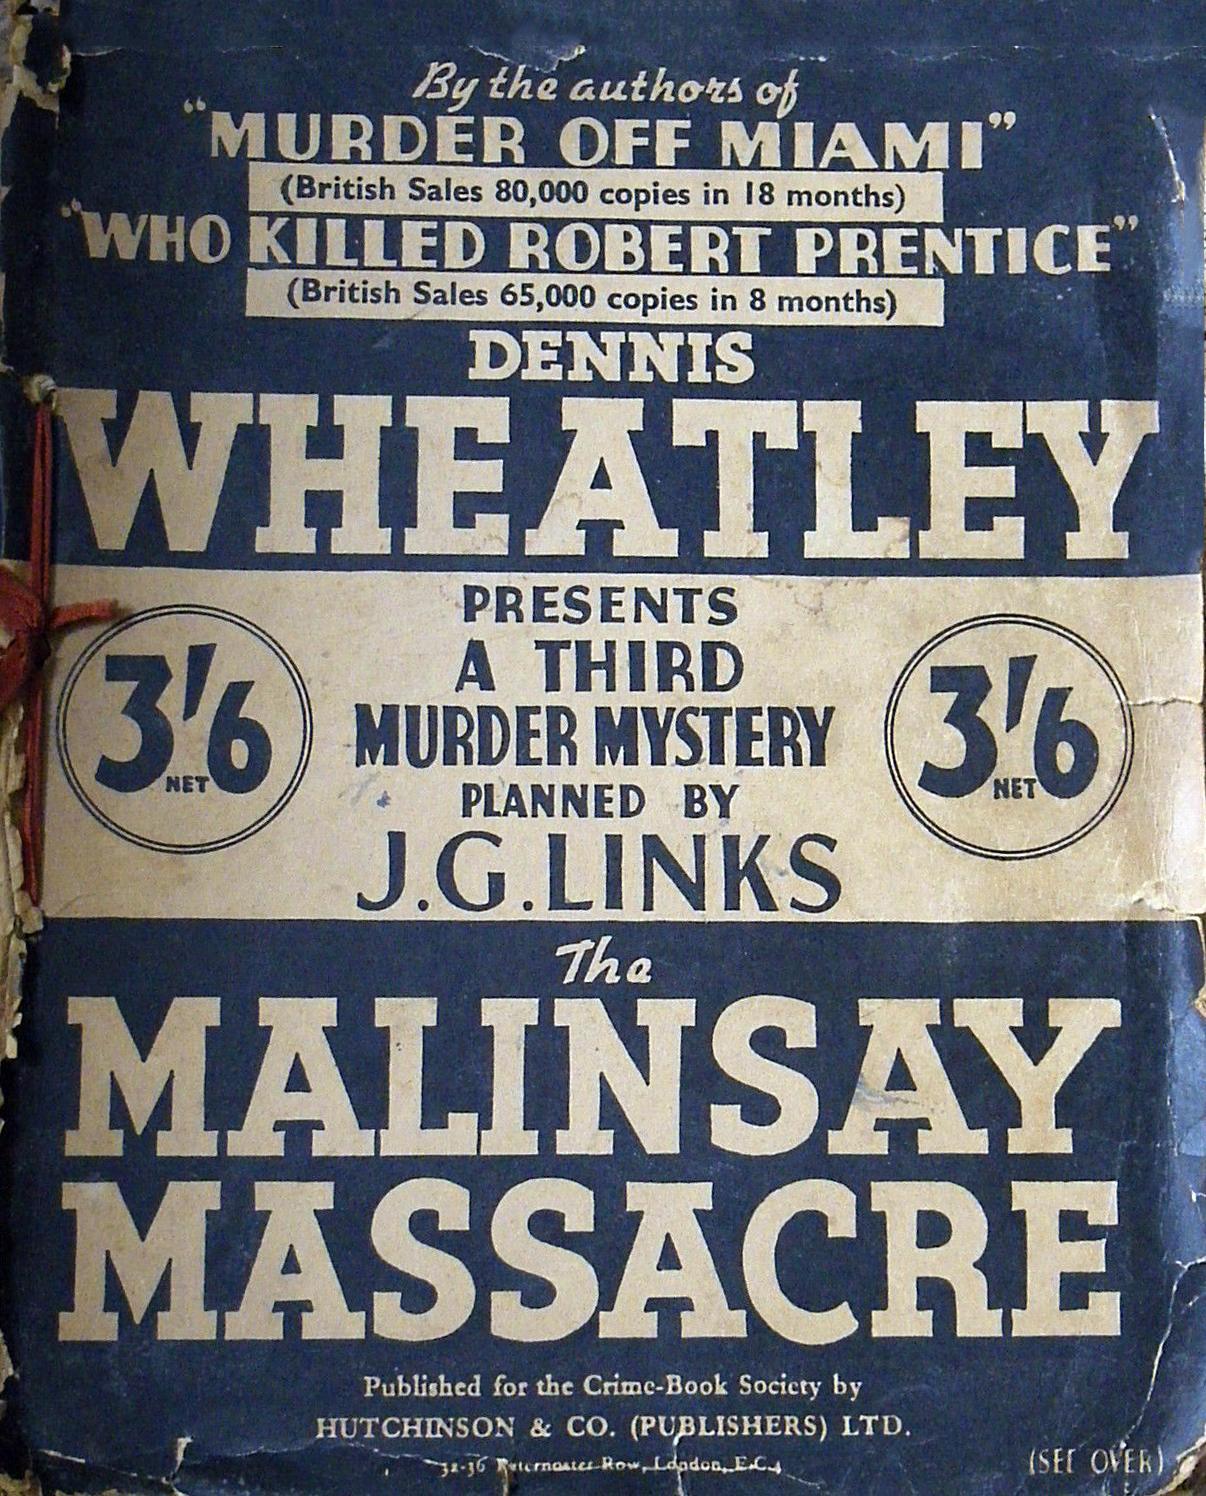 The Malinsay Massacre published in 1938.